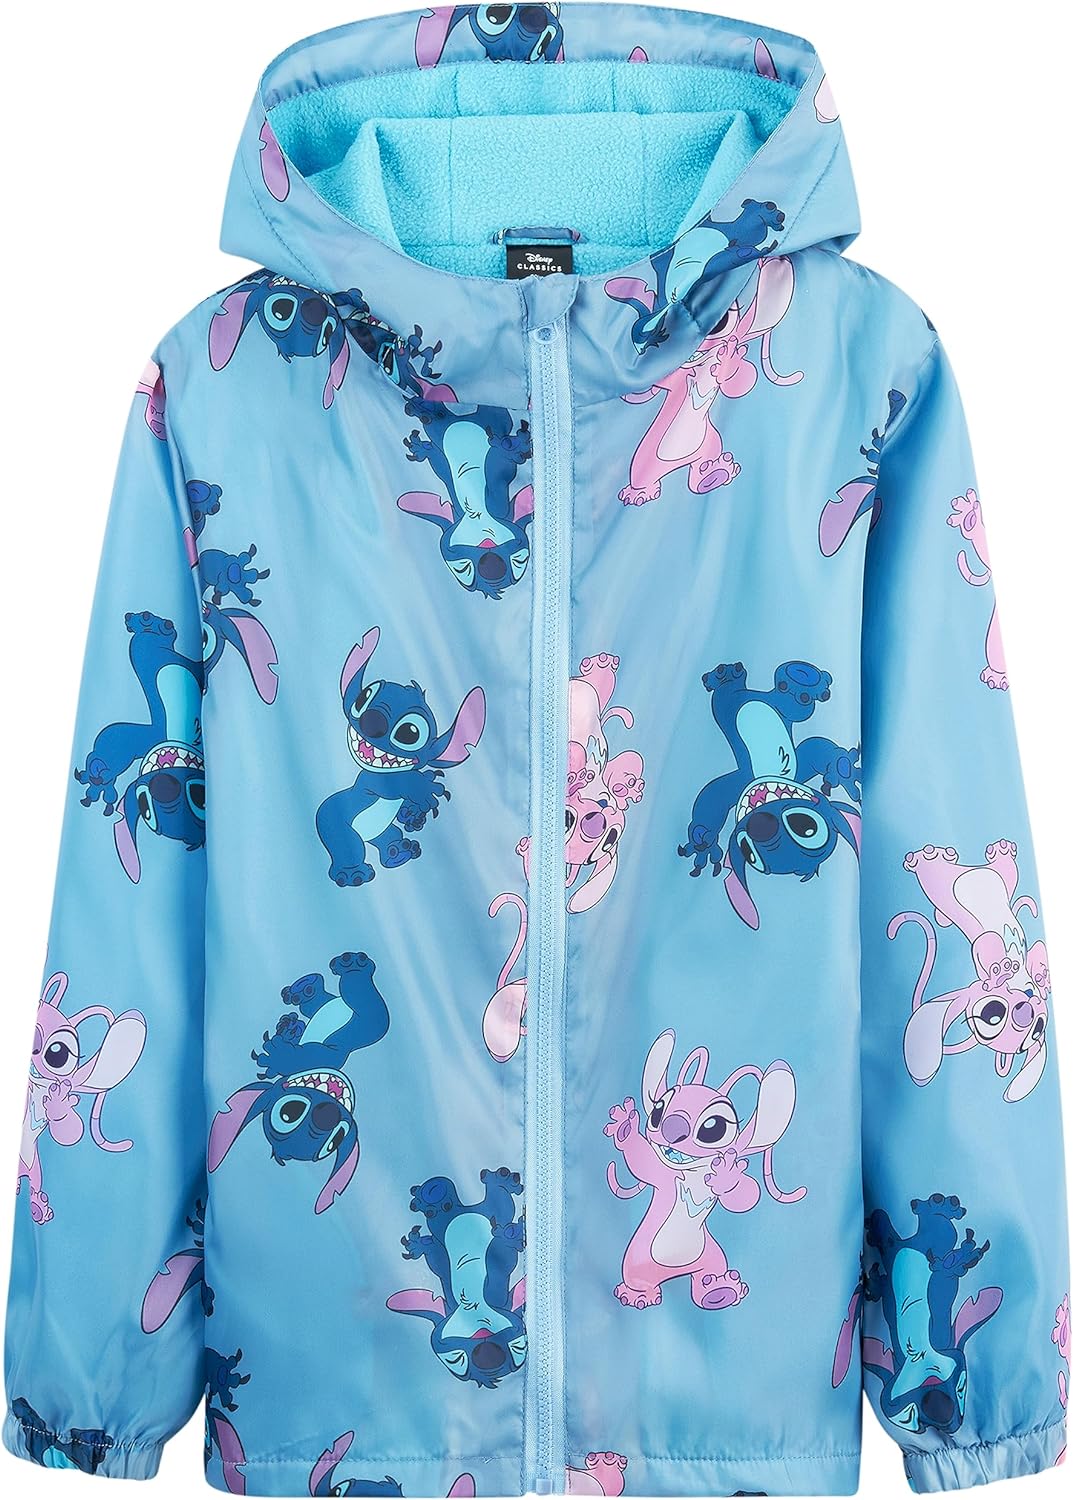 Disney Stitch Girls Raincoat - Waterproof Hooded Jacket for Kids 4-14 Years Fleece Lined - Stitch Gifts for Girls Teens